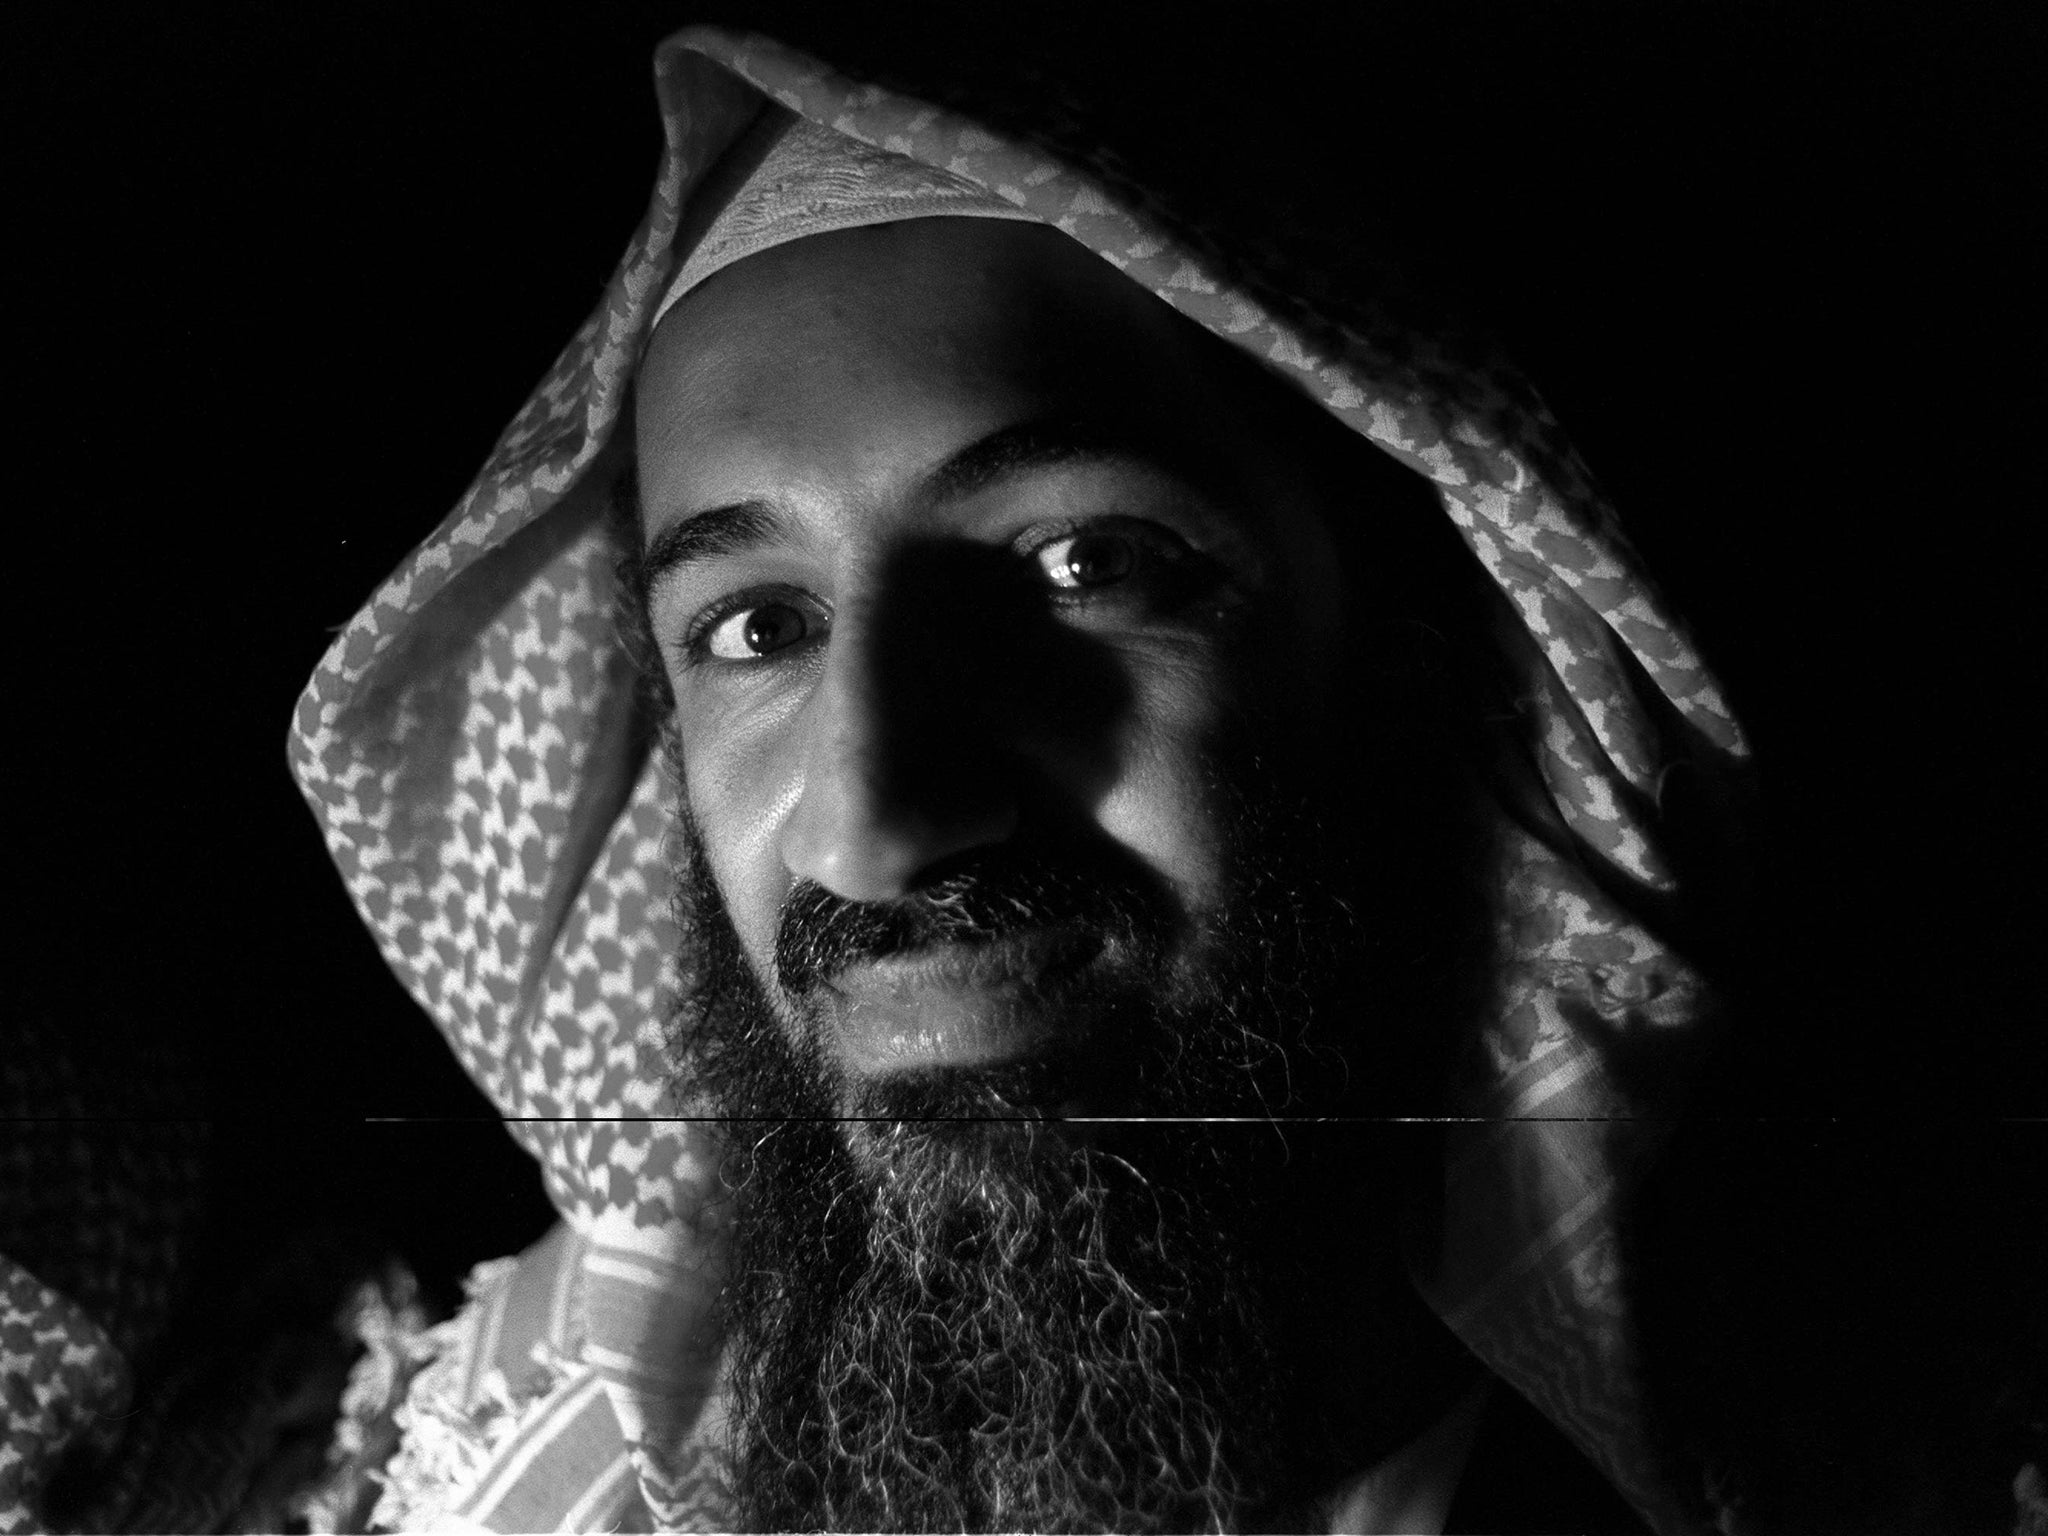 It appears the former al-Qaeda leader liked to indulge in serious politics and conspiracy theories